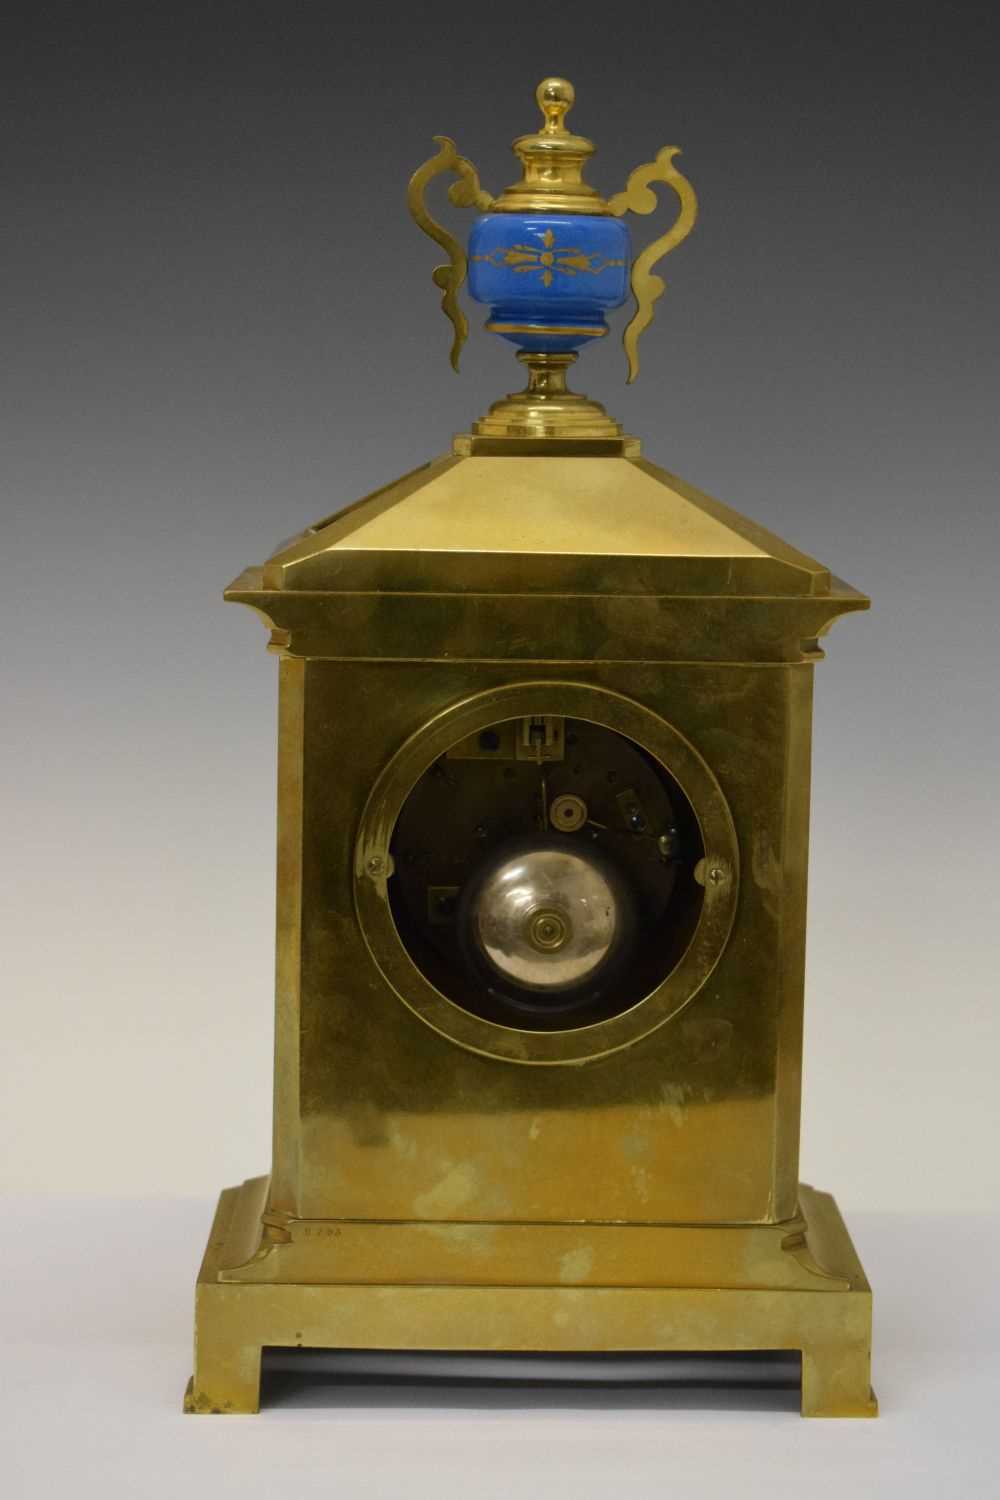 Mid 19th Century French Sevres-style porcelain mounted mantel clock - Image 5 of 13